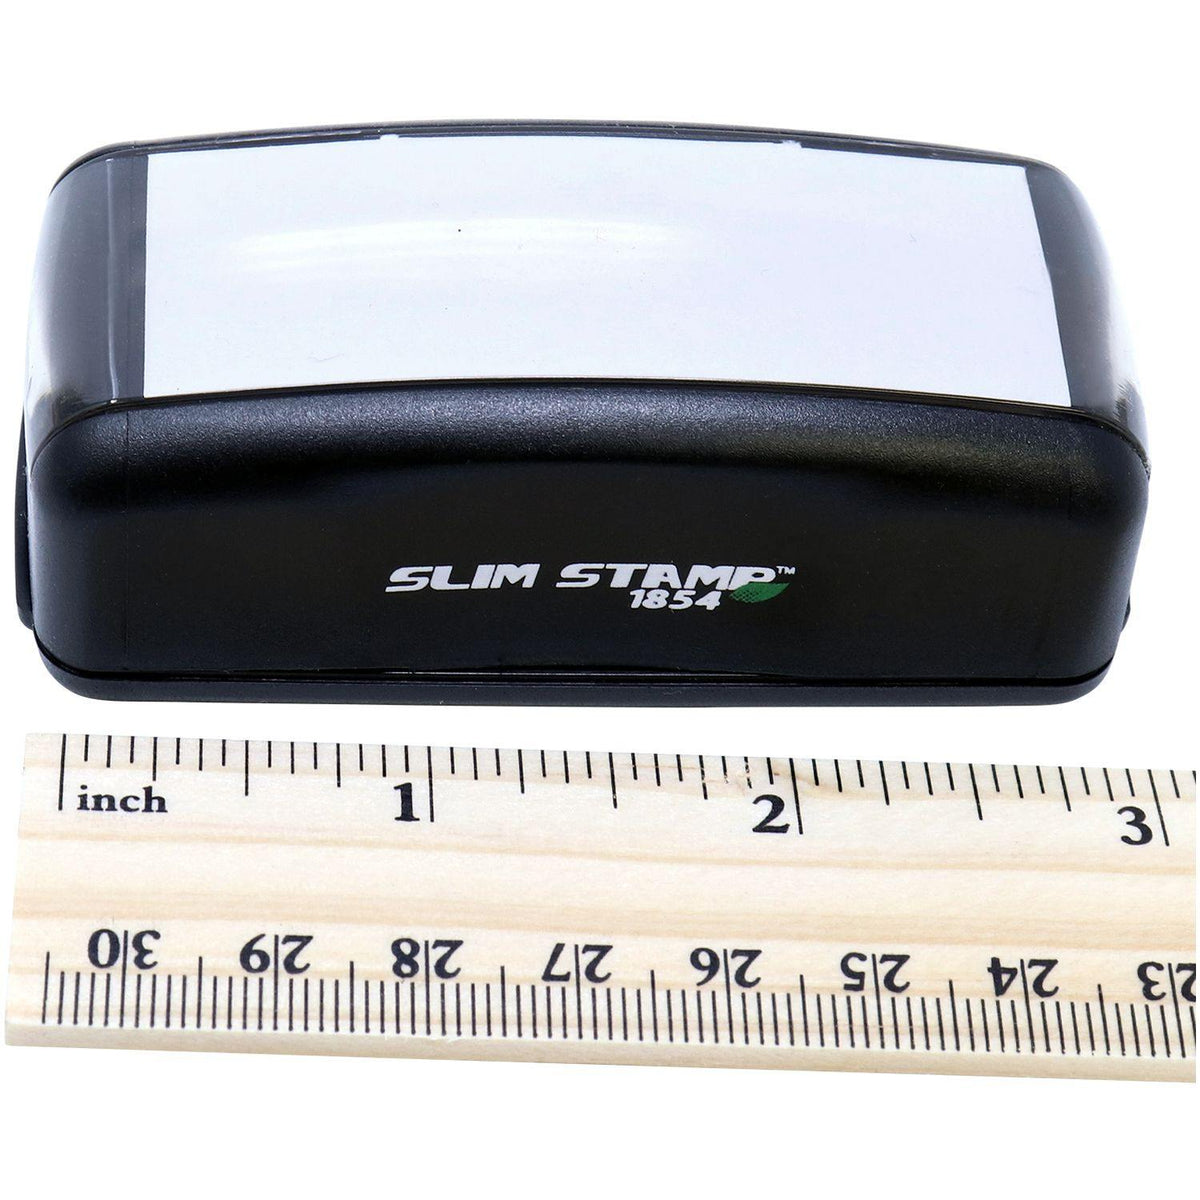 Measurement Large Pre-Inked Official Stamp with Ruler